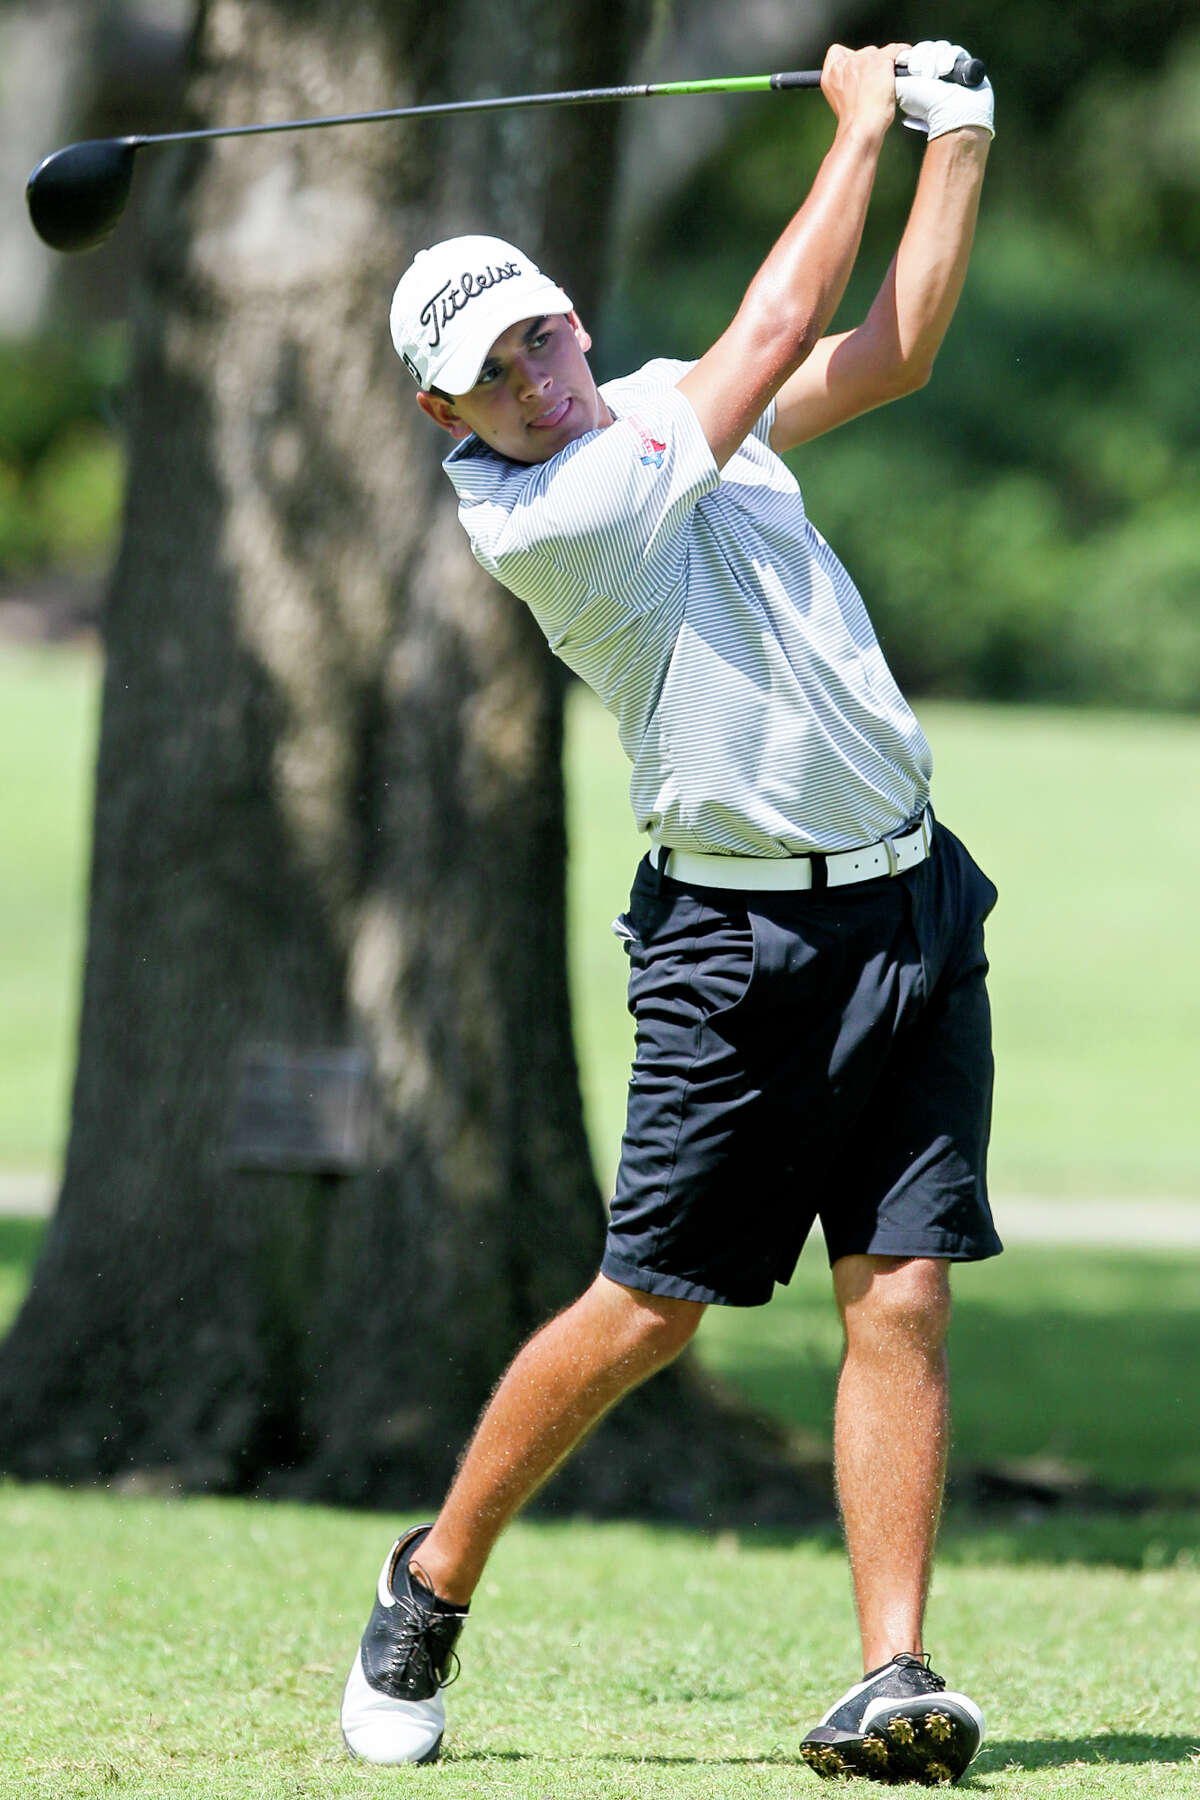 Chad Sewell from Conroe tees off on the 7th hole during the first round of the 107th Texas Amateur golf tournament at Oak Hills Country Club on Thursday, June 16, 2016. Wilhelm finished the day 3-under-par 68 to claim a share of the early lead in the tournament. MARVIN PFEIFFER/ mpfeiffer@express-news.net